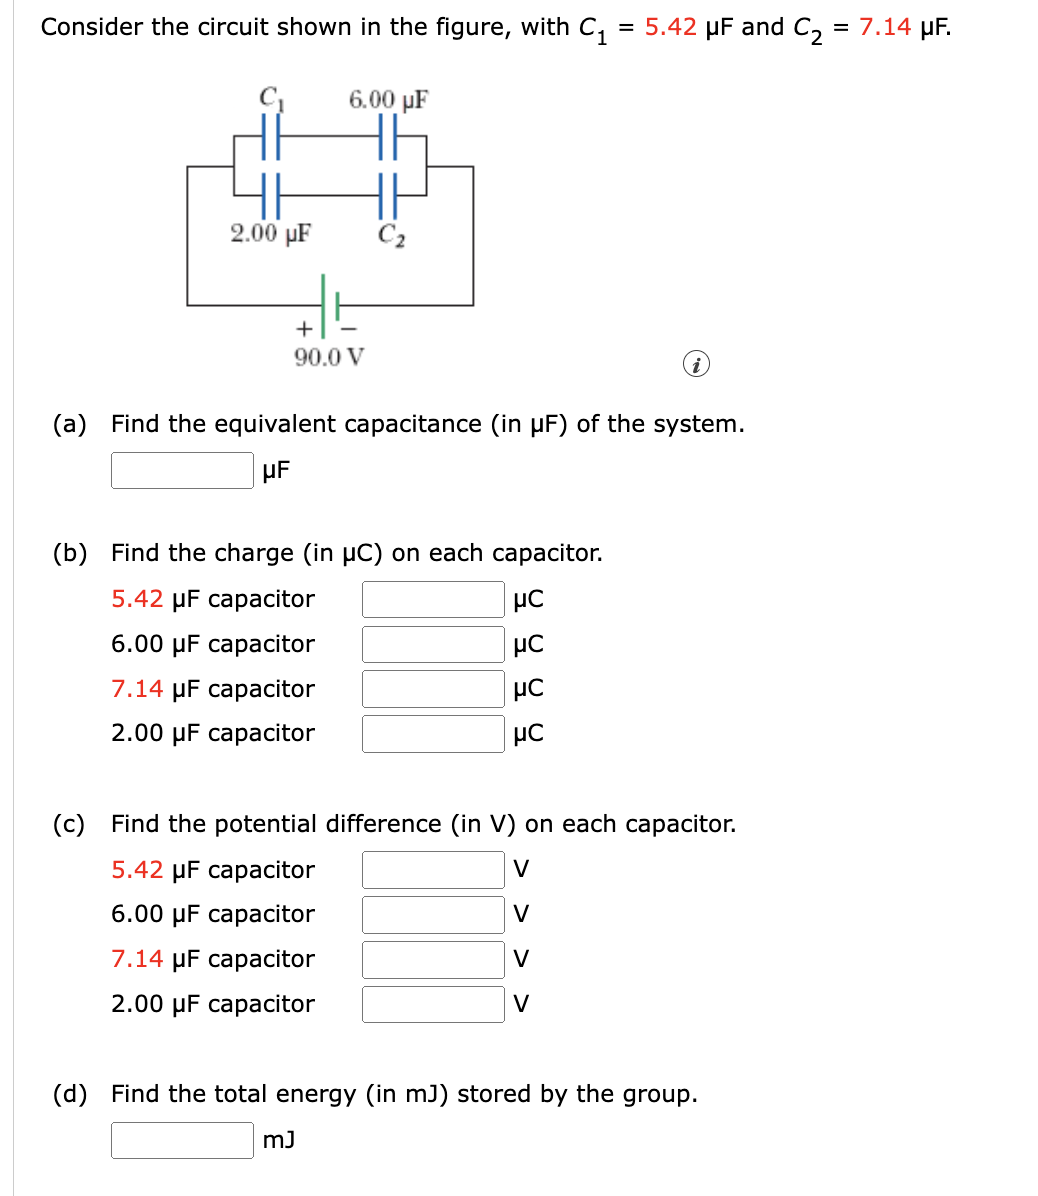 Consider the circuit shown in the figure, with C, = 5.42 µF and C, = 7.14 µF.
%3D
6.00 µF
2.00 µF
C2
+
90.0 V
(a) Find the equivalent capacitance (in µF) of the system.
(b) Find the charge (in µC) on each capacitor.
5.42 µF capacitor
6.00 µF capacitor
7.14 µF capacitor
2.00 µF capacitor
(c) Find the potential difference (in V) on each capacitor.
5.42 µF capacitor
V
6.00 µF capacitor
V
7.14 µF capacitor
V
2.00 µF capacitor
V
(d) Find the total energy (in mJ) stored by the group.
